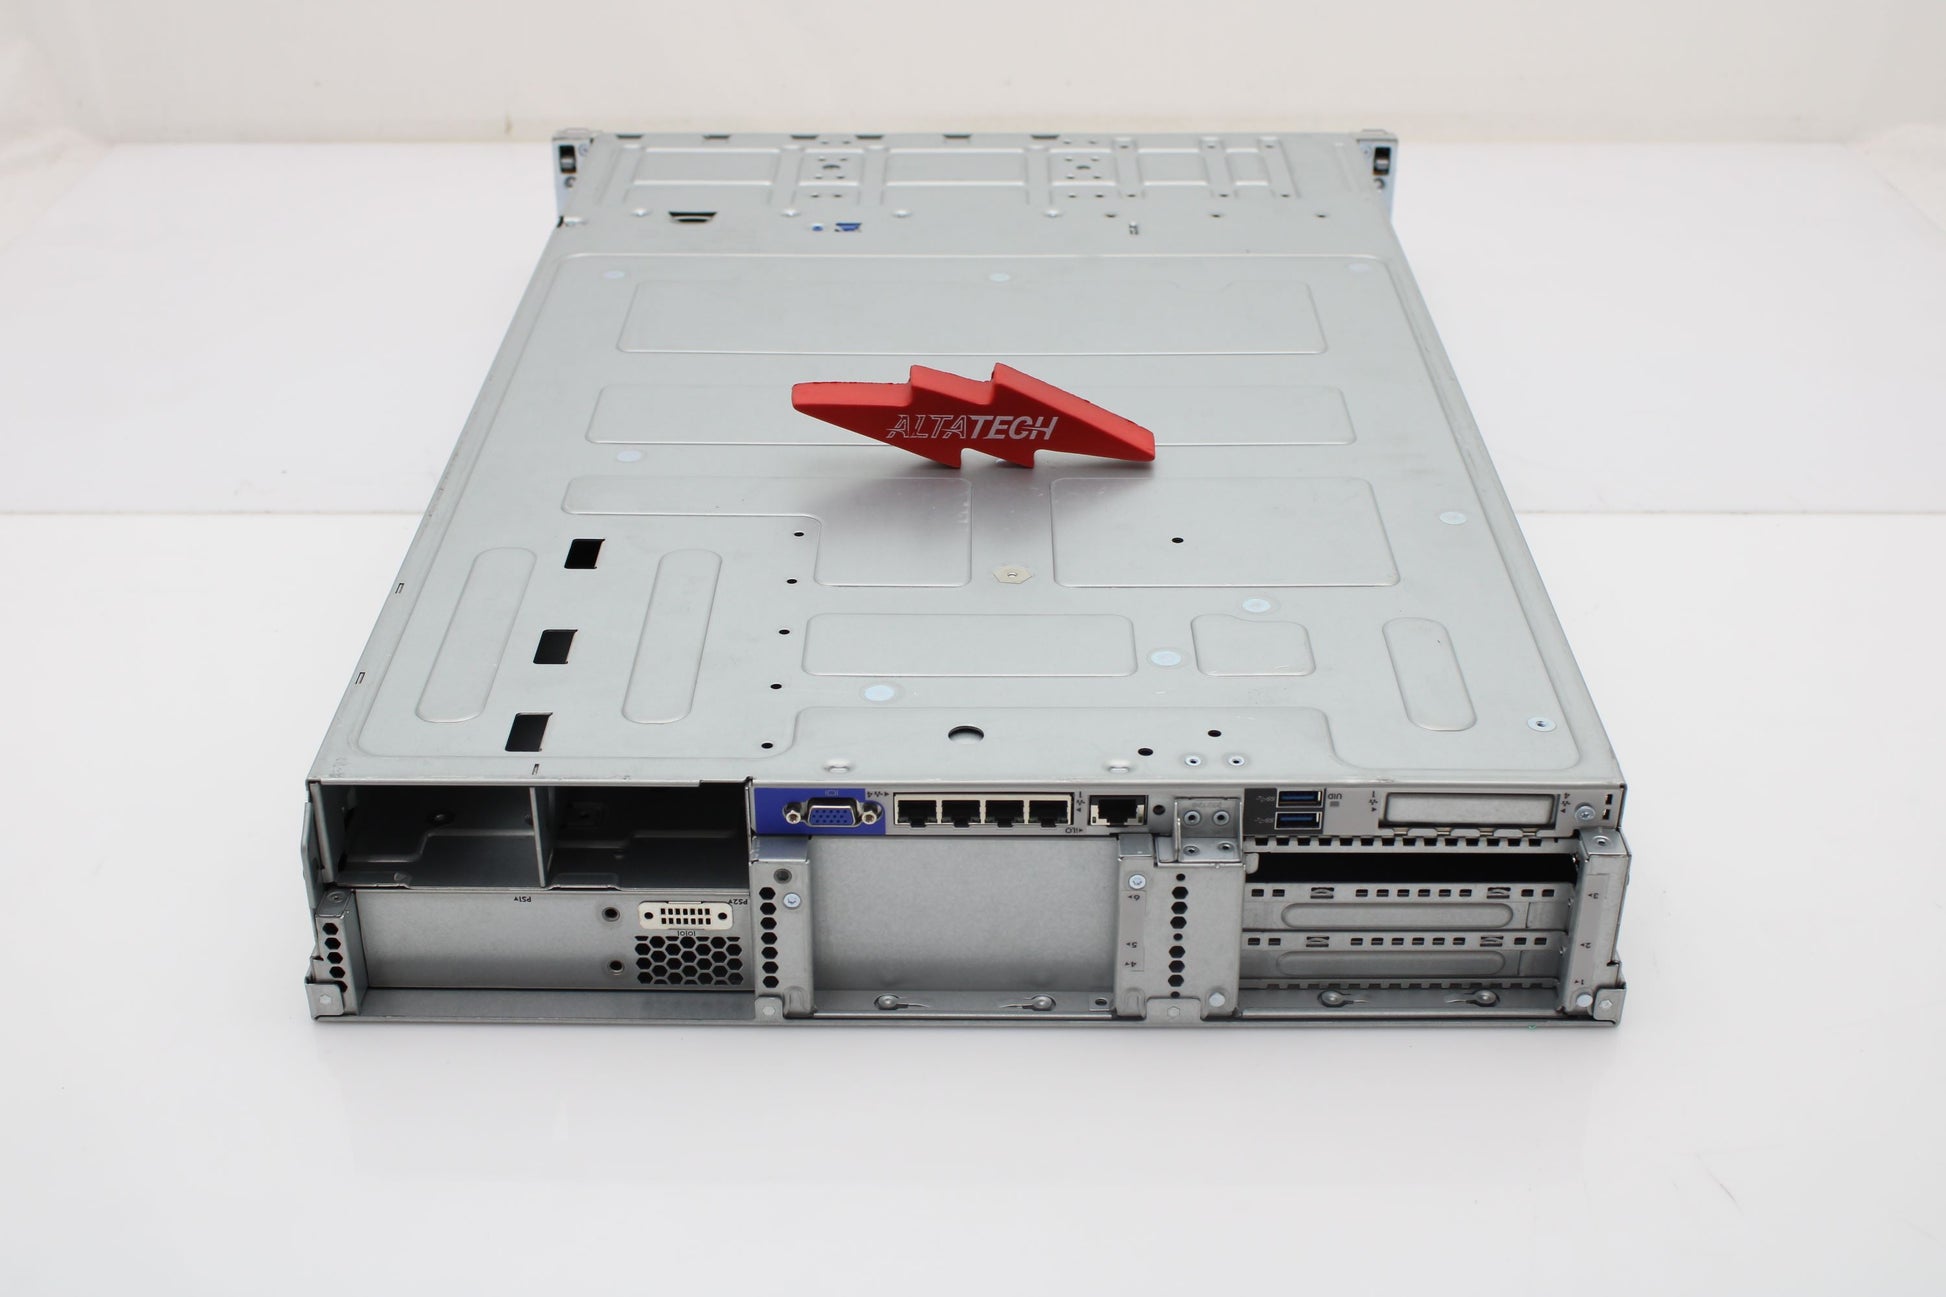 HP 767032-B21 ProLiant DL380 G9 24x SFF CTO Server Chassis, Used